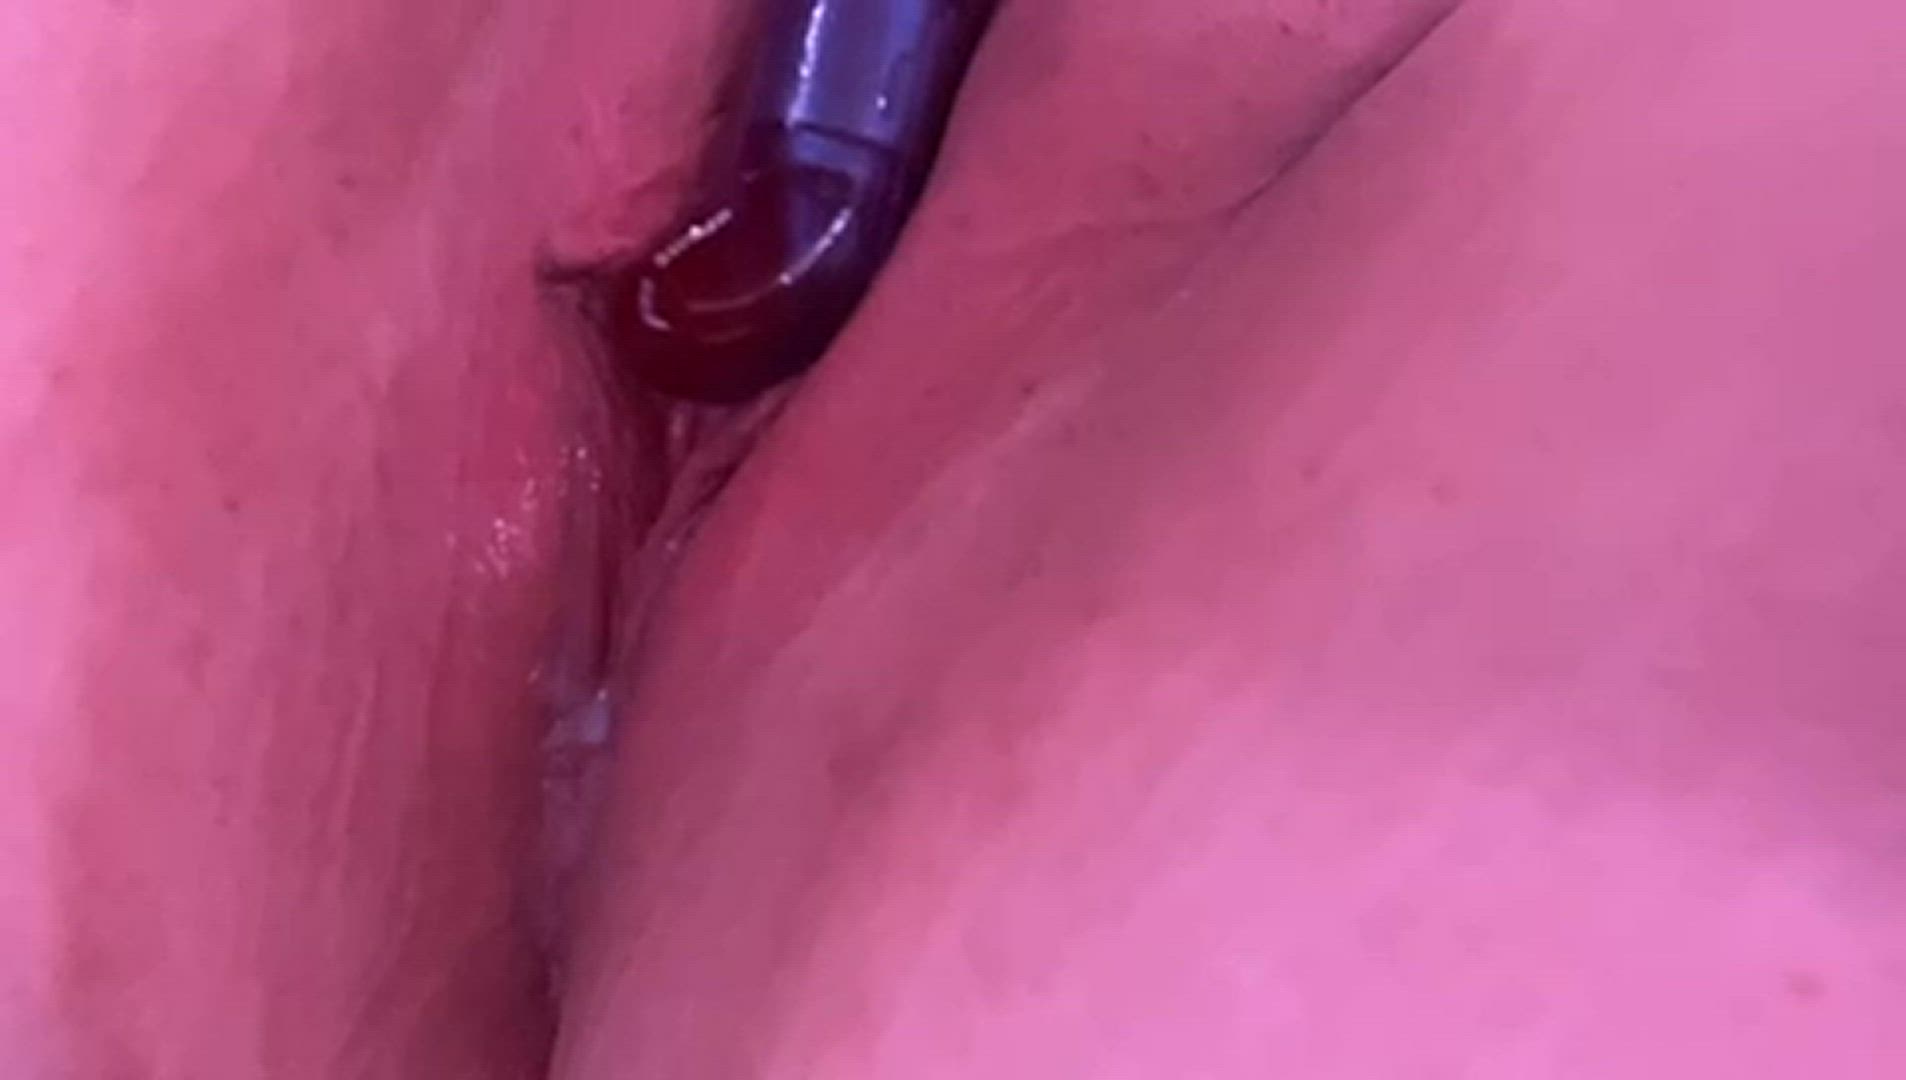 Squirt porn video with onlyfans model scottishslztxx <strong>@scottishslztxx</strong>